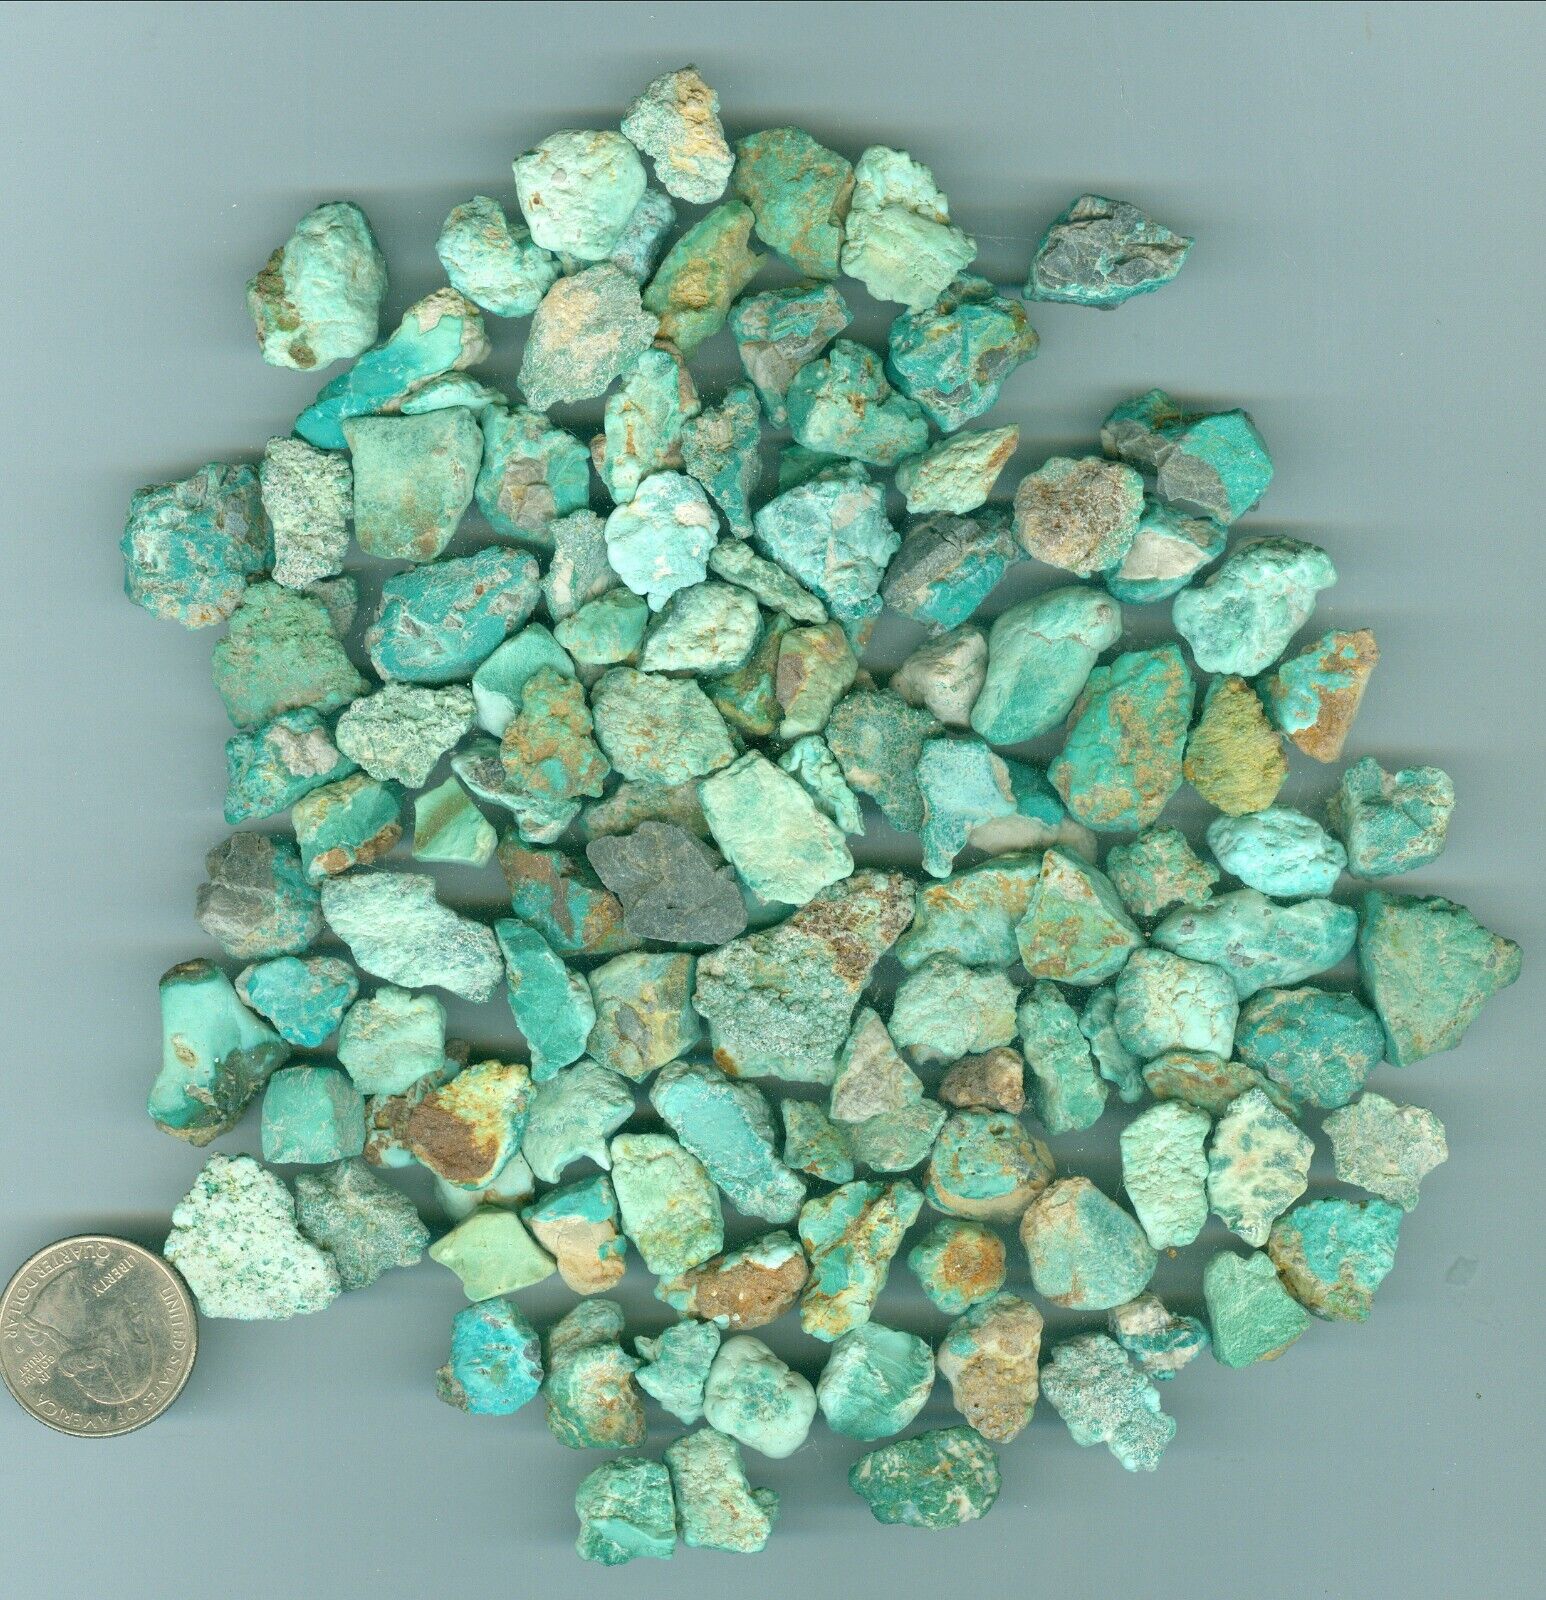 236 Grams of Natural American Fox Mine Turquoise Rough Nevada Turquoise